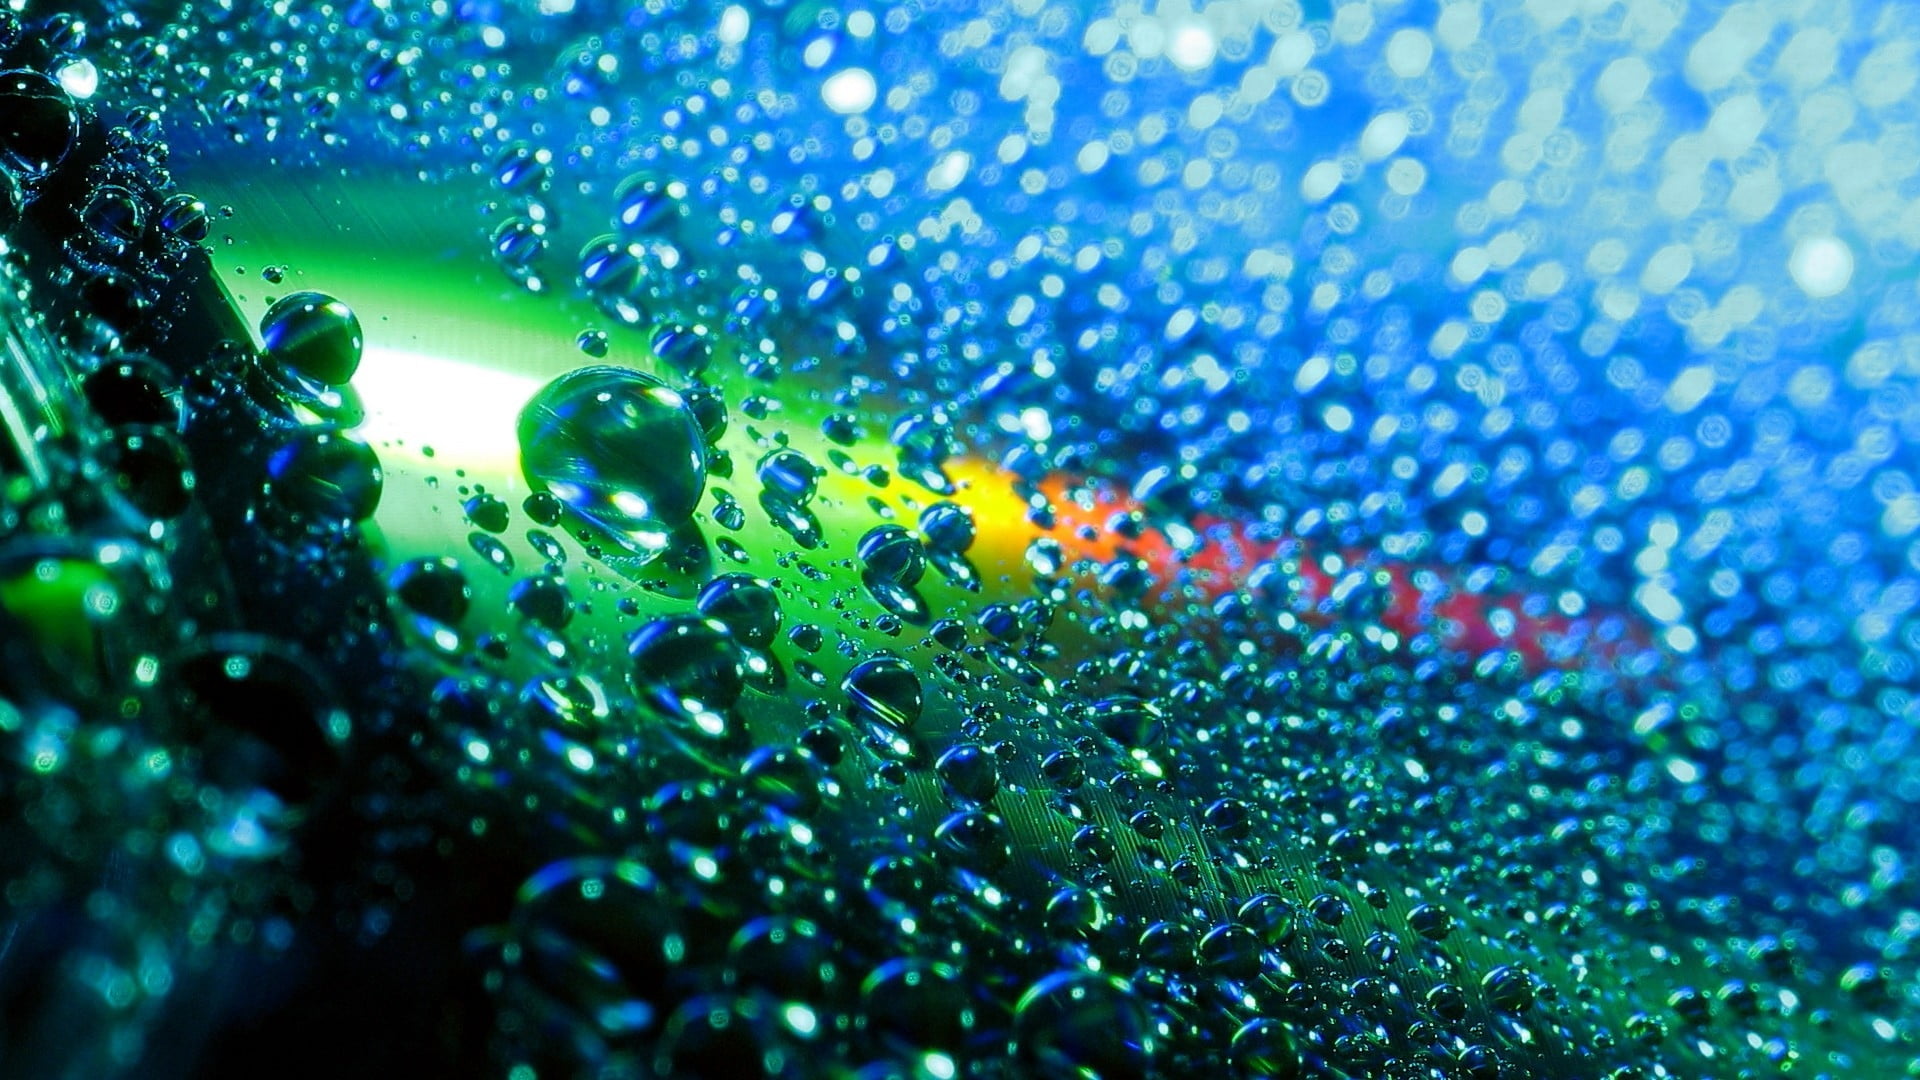 macro photography of water droplets with green and blue lights